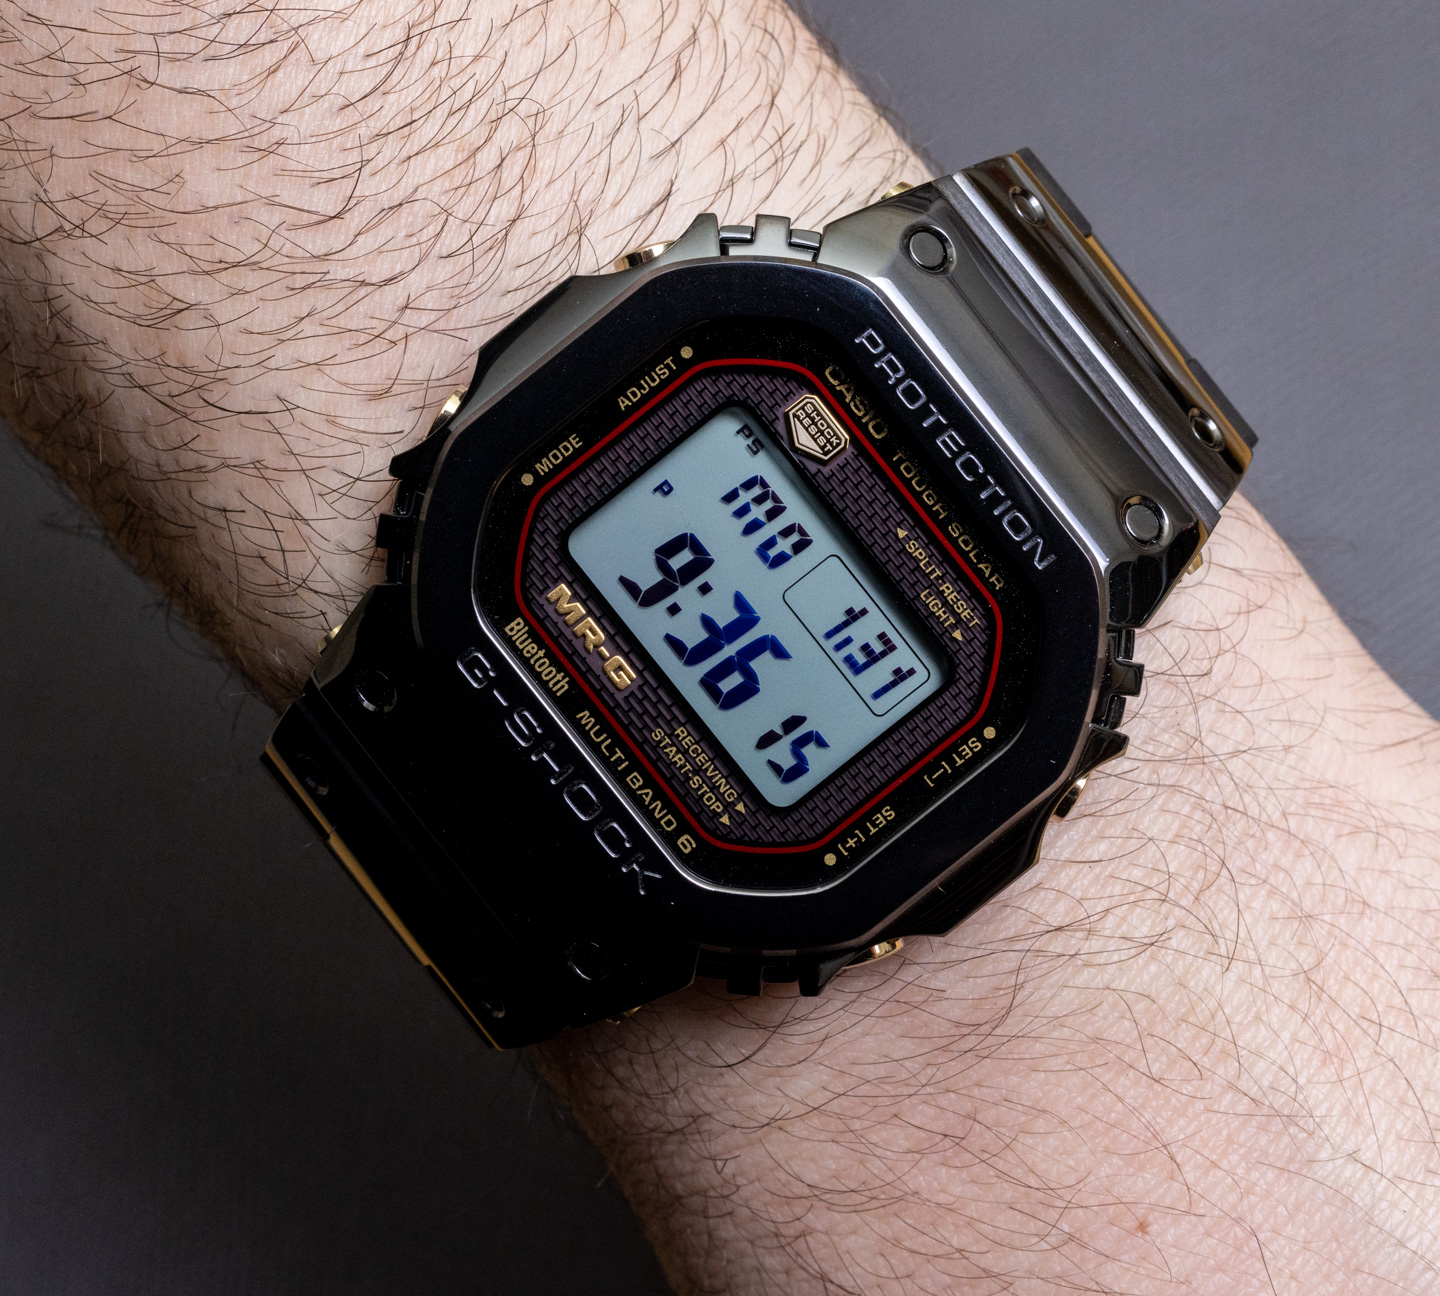 The Latest Digital Casio Is Incredibly Cool, But 